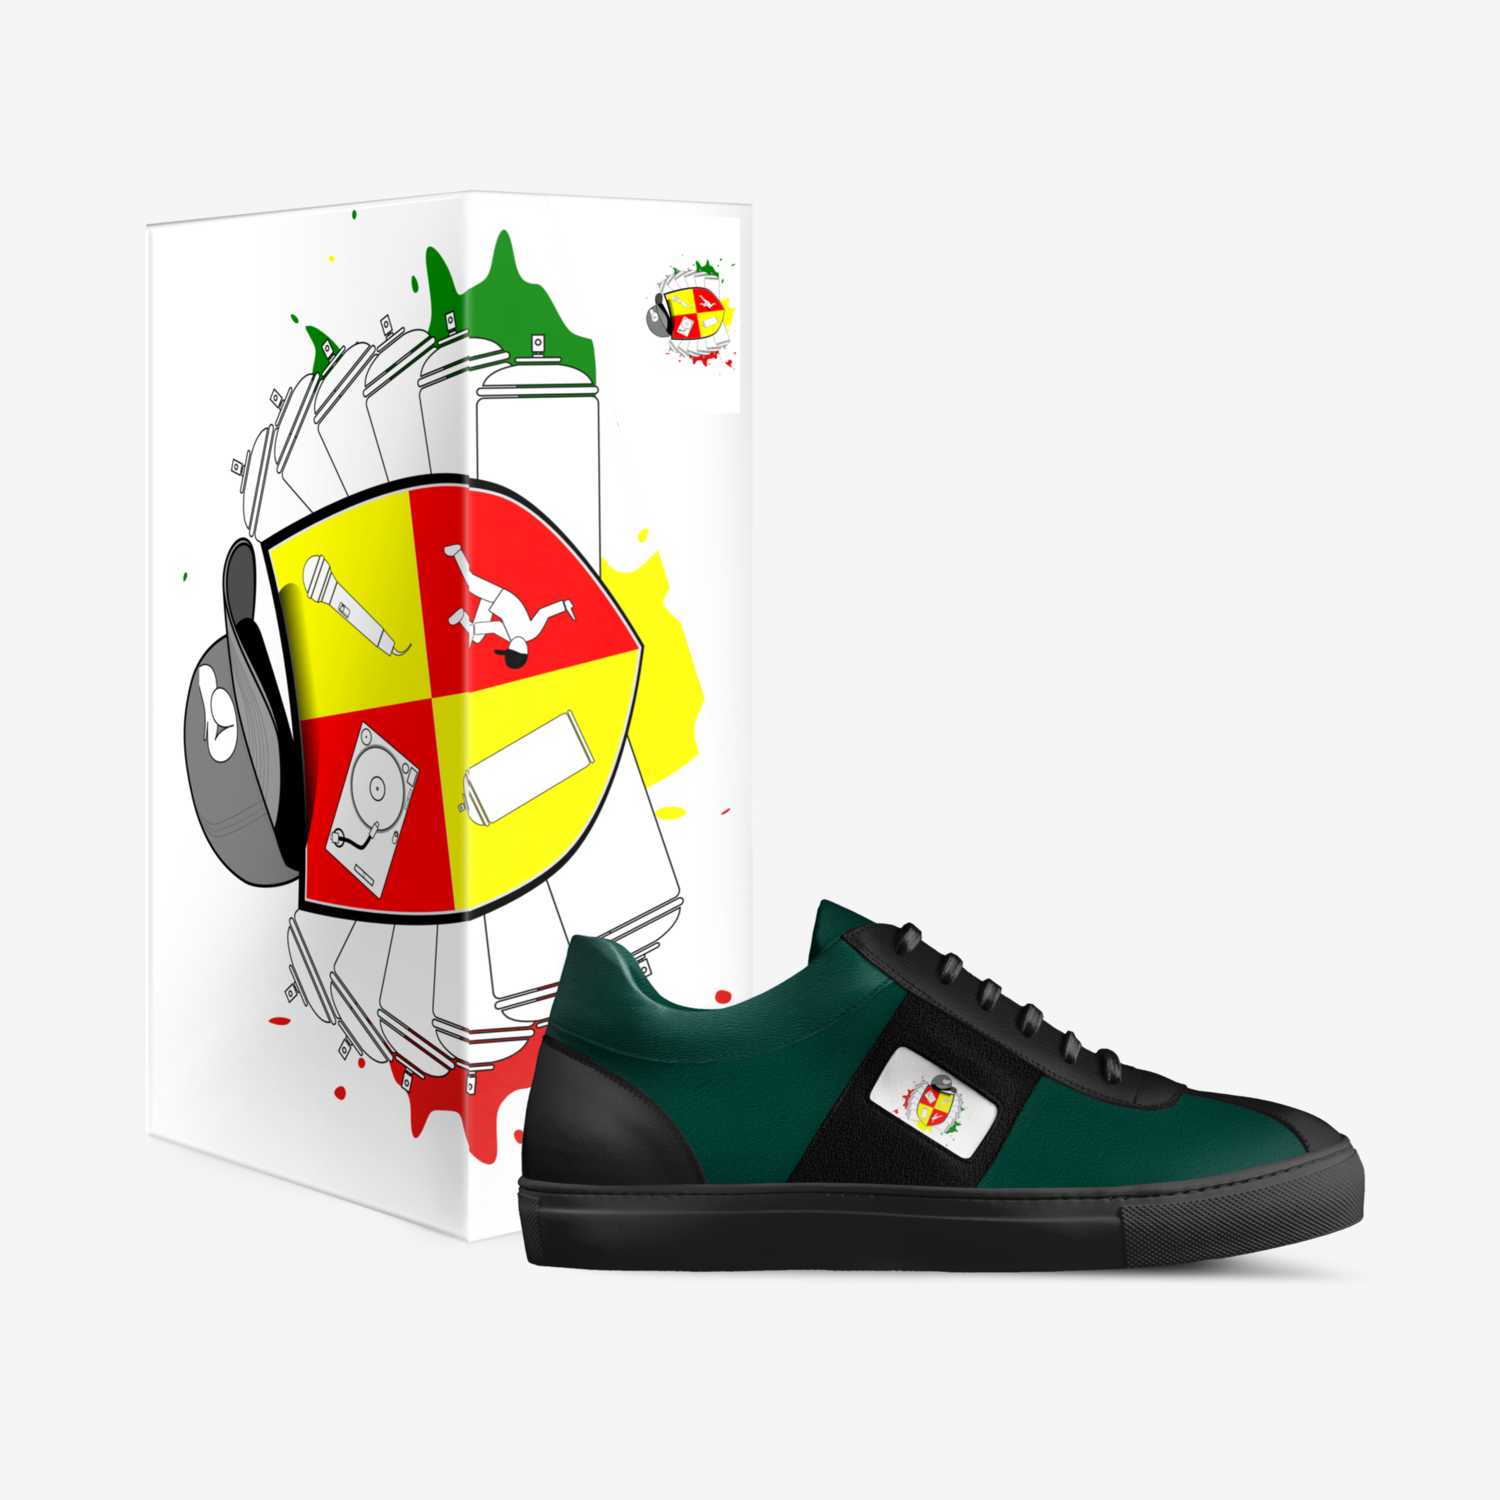 HipHop4Elements custom made in Italy shoes by Rune Laursen | Box view